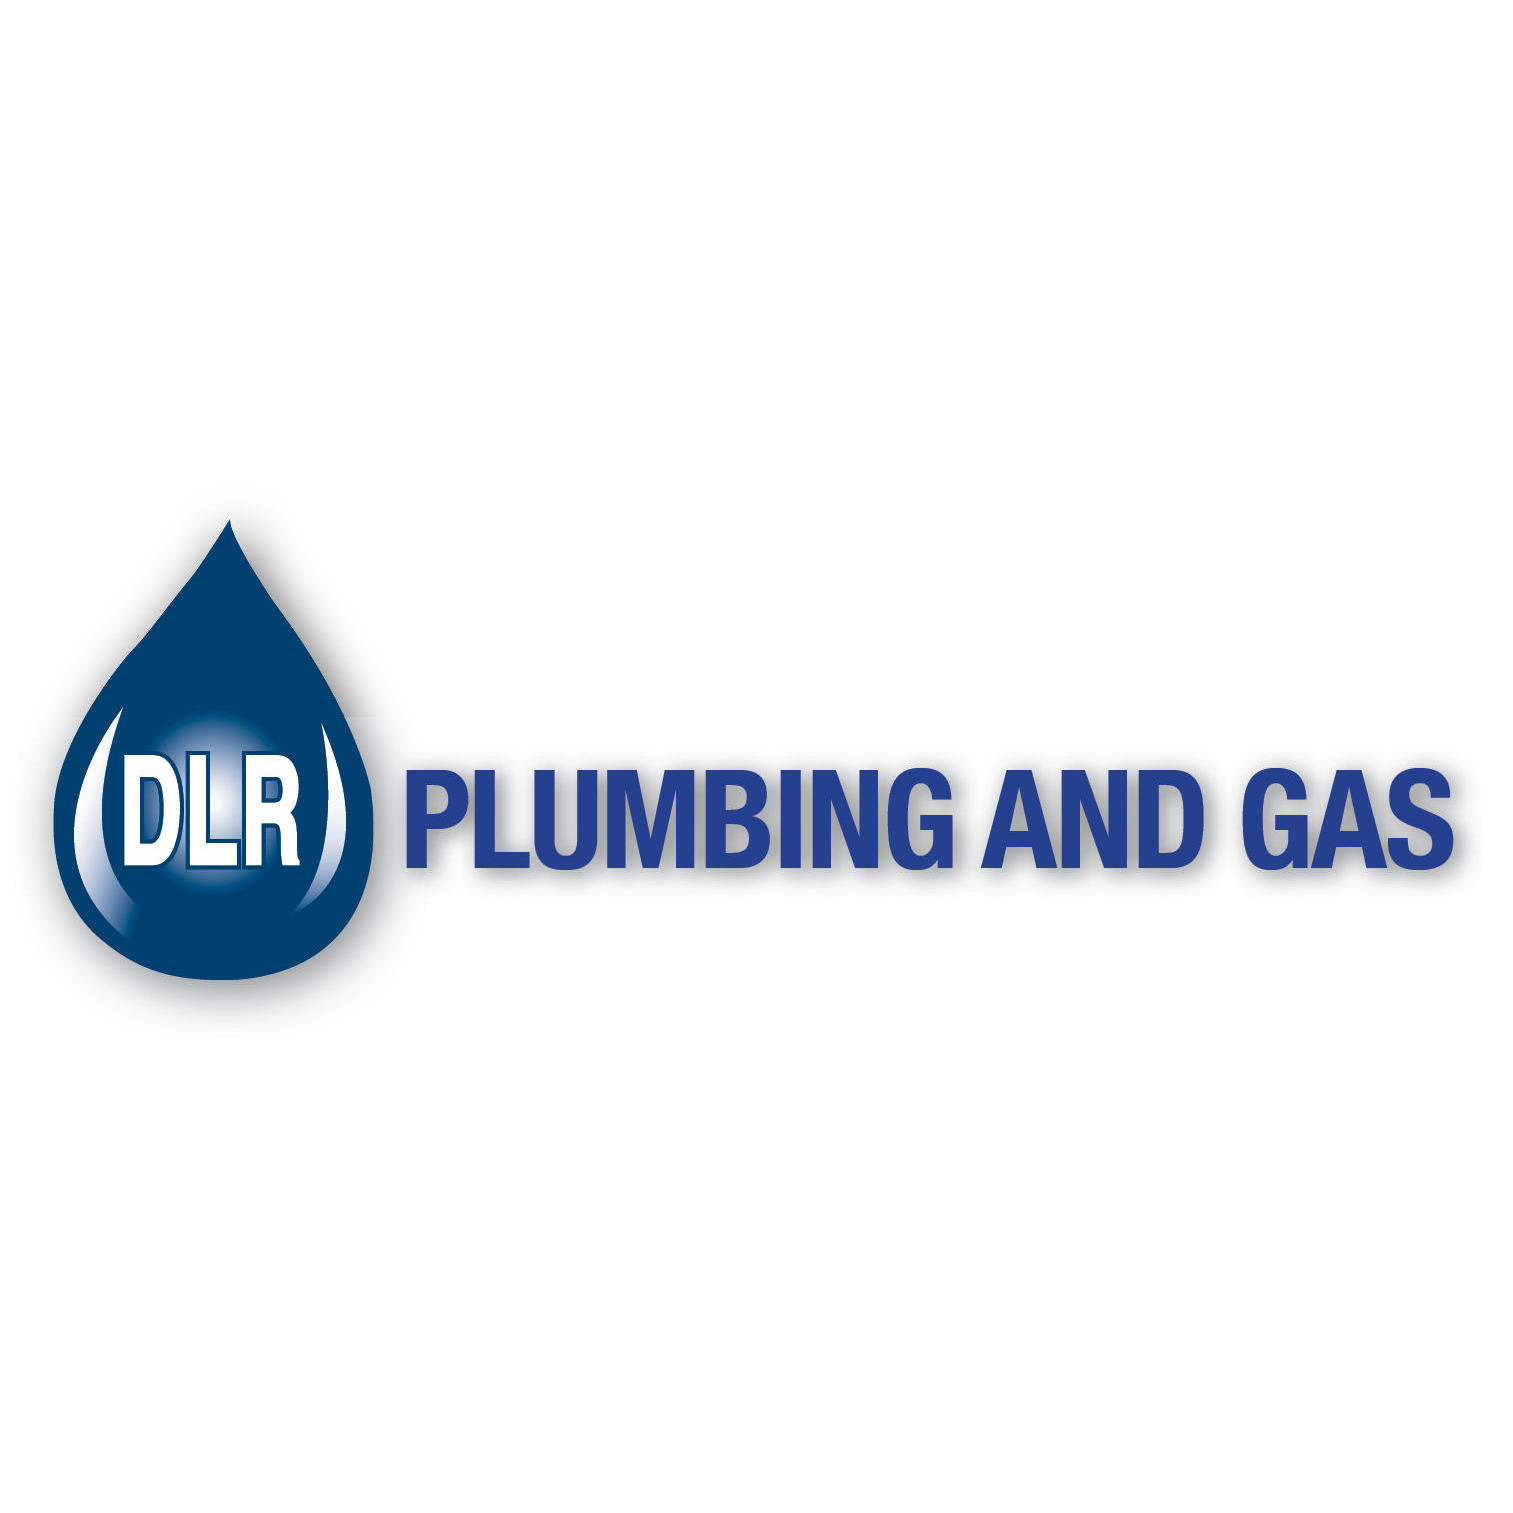 DLR Plumbing and Gas PL8879 - Newman, WA - 0438 793 690 | ShowMeLocal.com